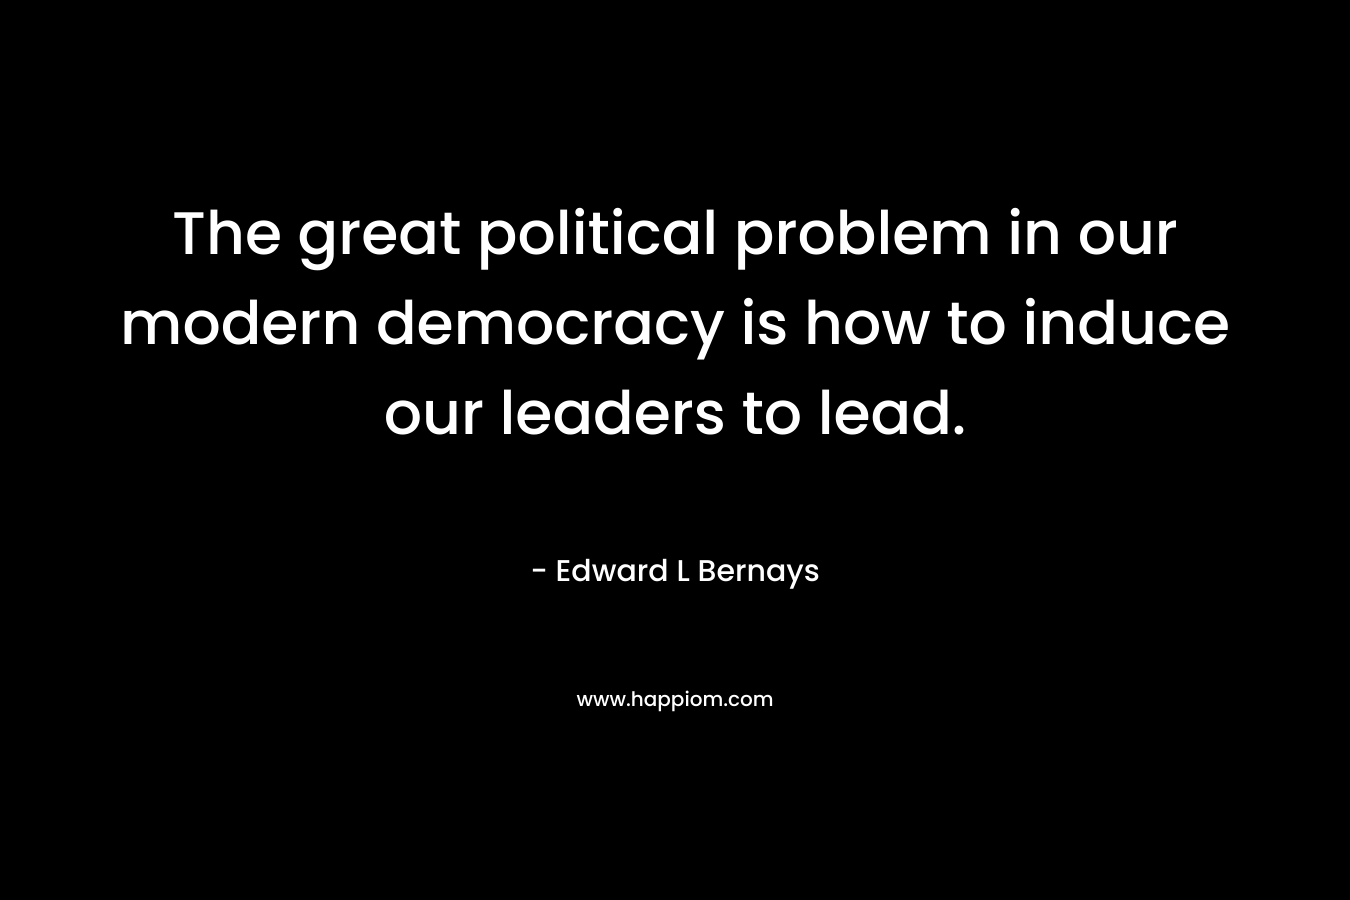 The great political problem in our modern democracy is how to induce our leaders to lead.